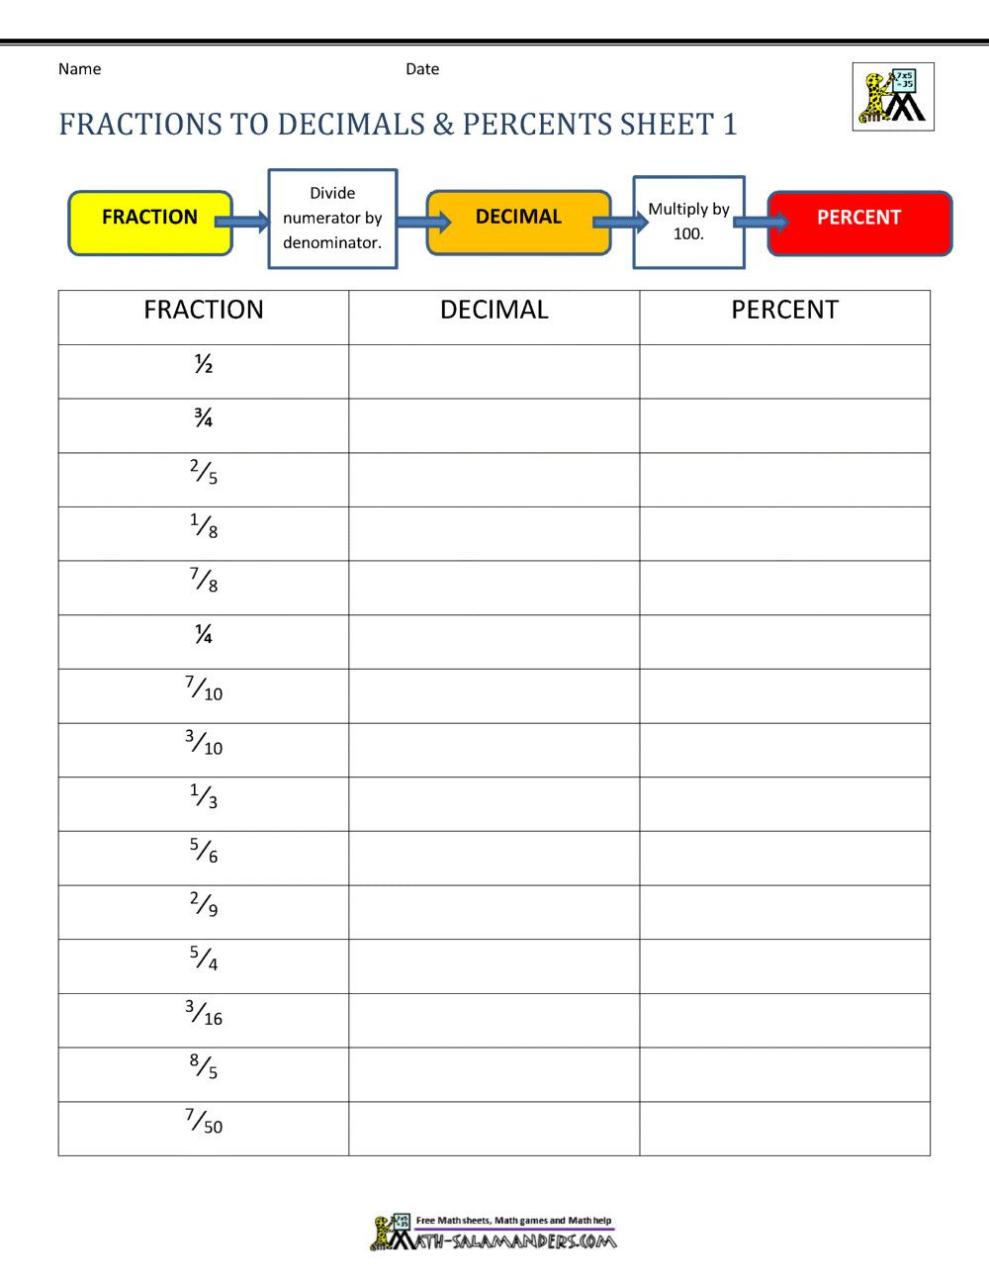 Converting Fractions Decimals And Percents Worksheets With Answers